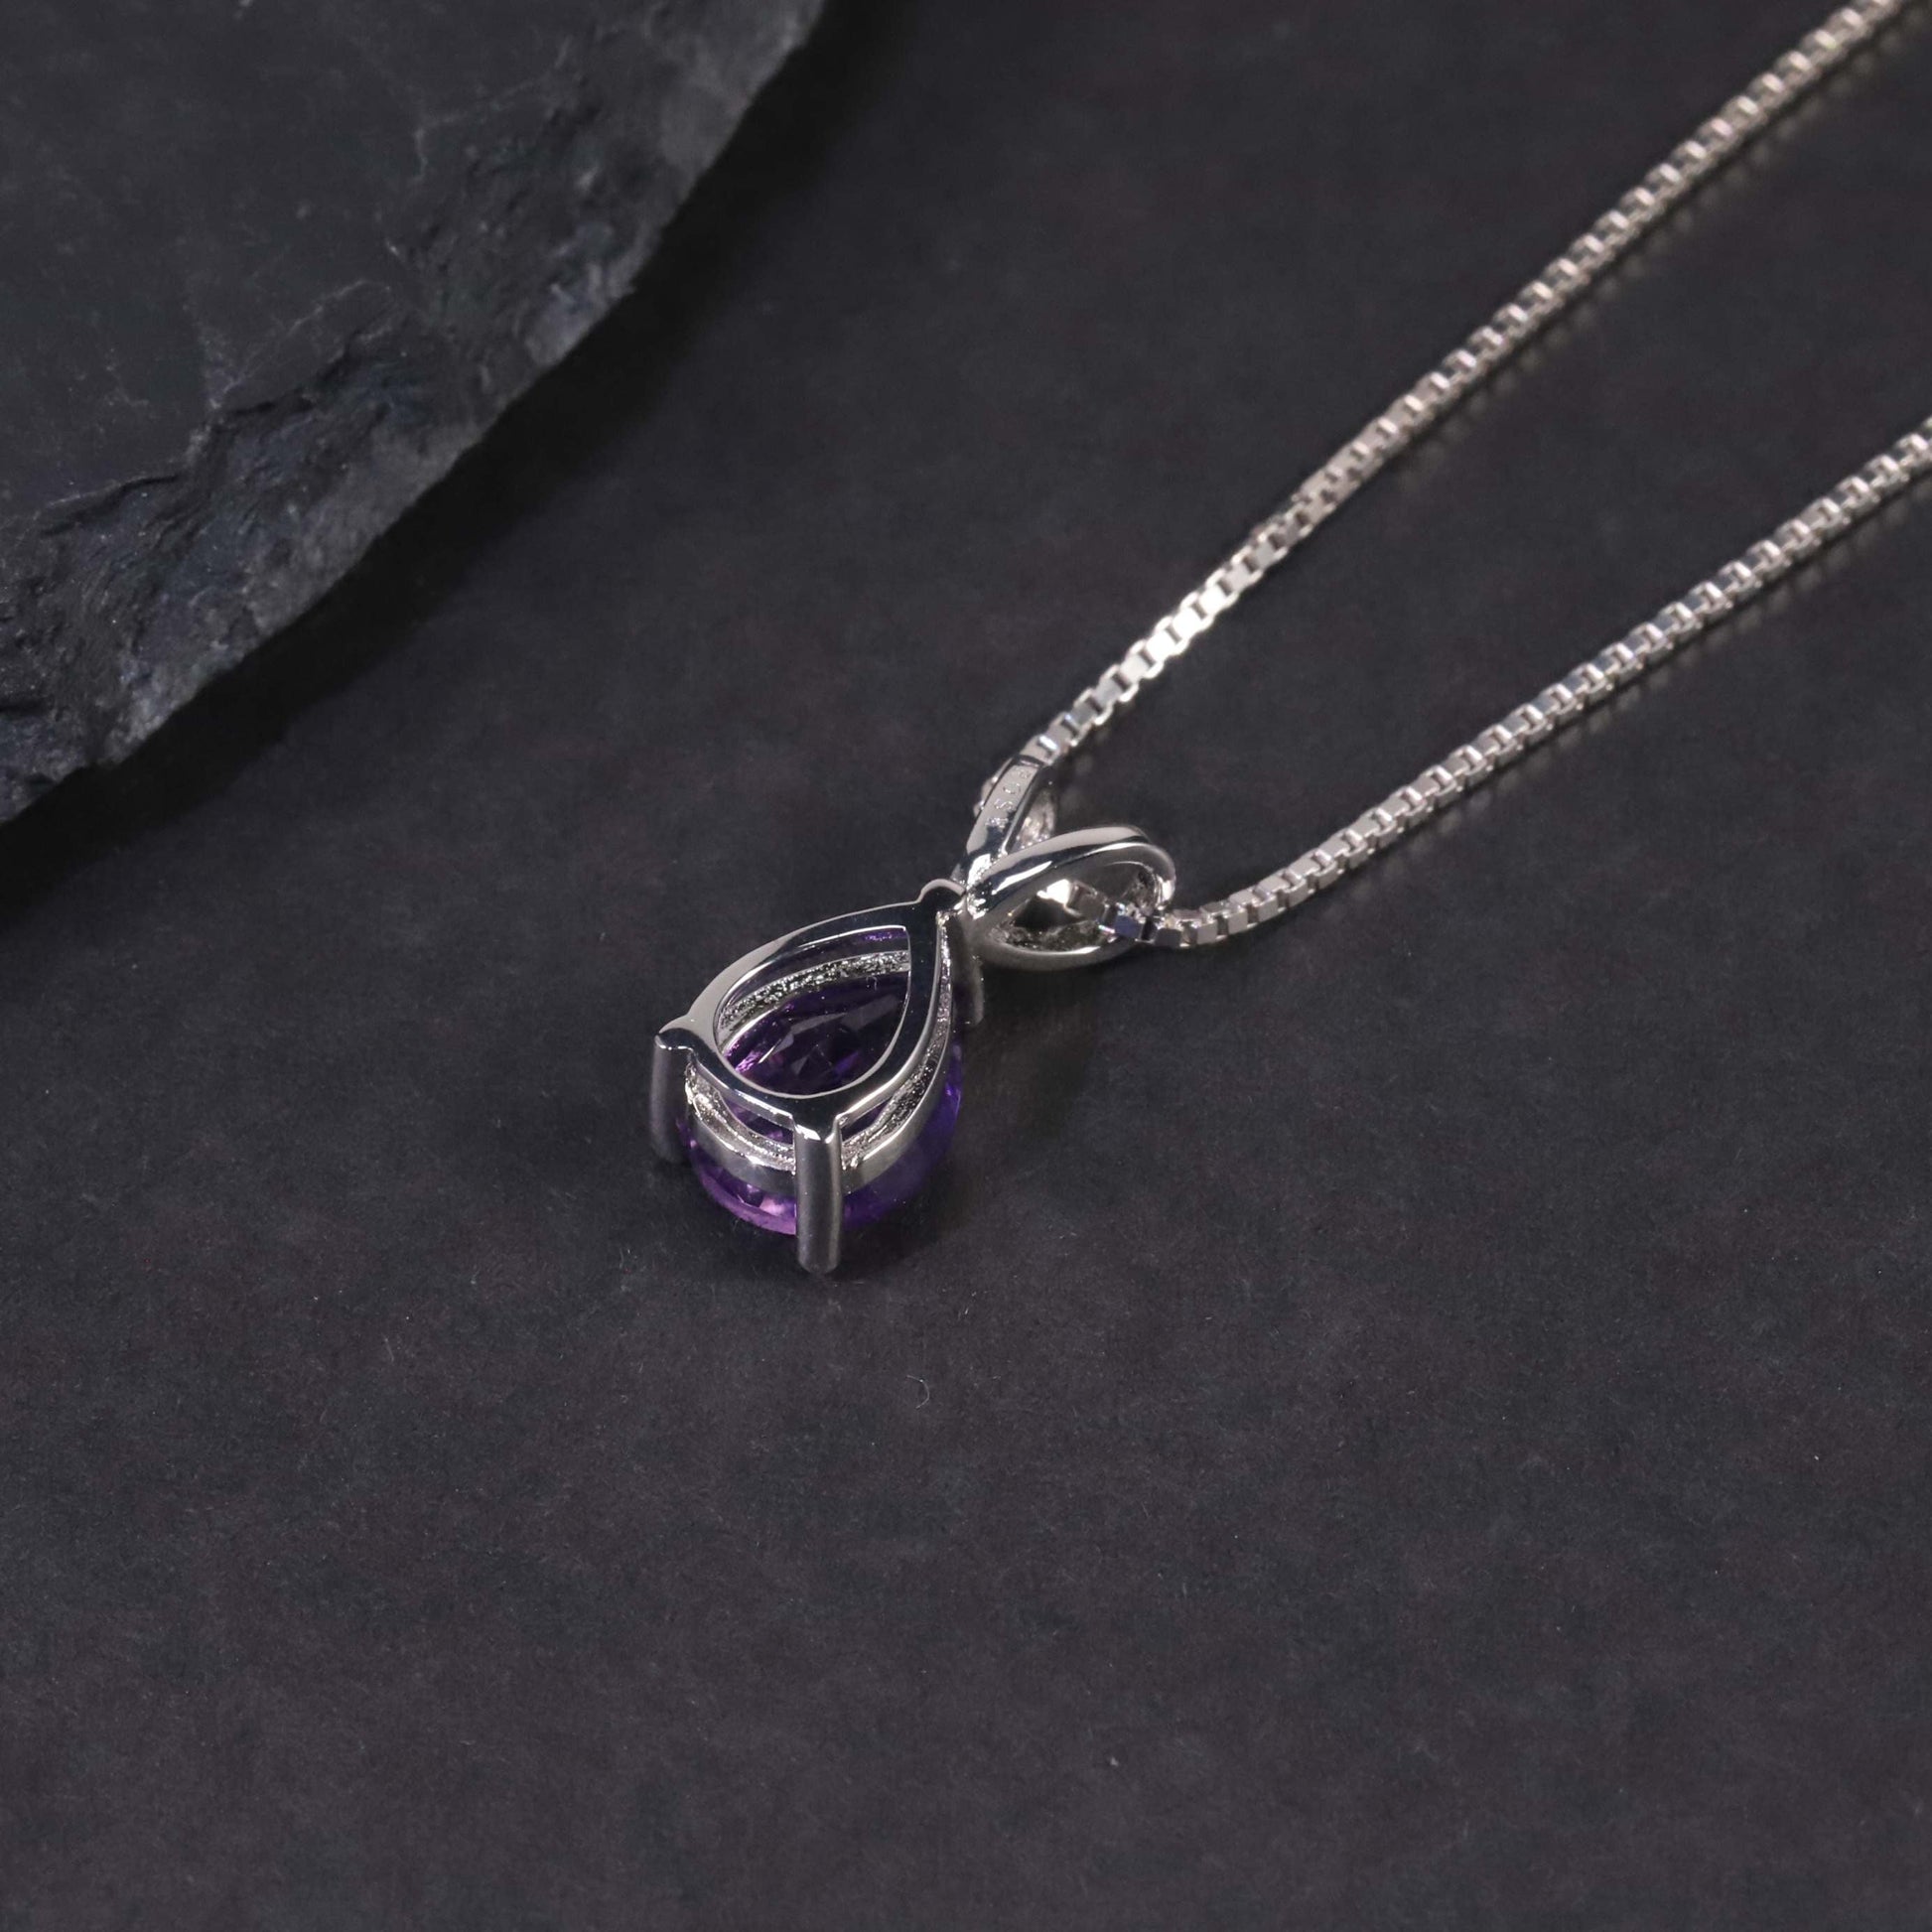 Back view of the Pear Amethyst Pendant, showcasing the smooth and polished finish of the sterling silver setting.